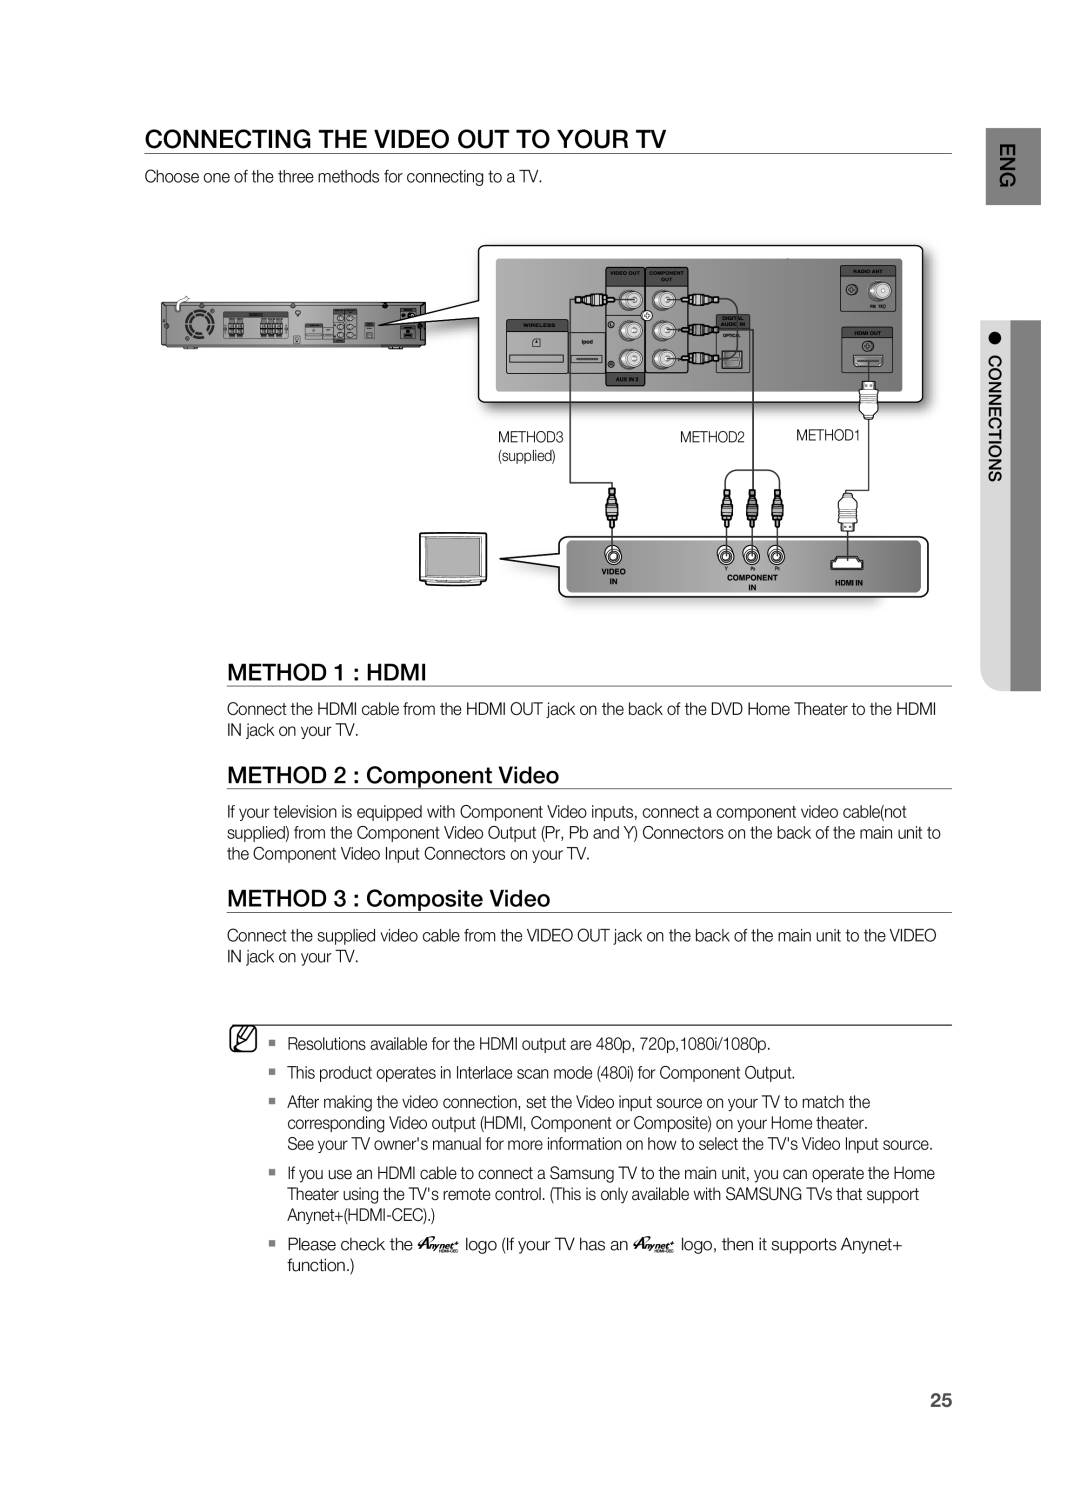 Samsung HT-TZ515 user manual CONNECTINg THE VIDEO OUT TO YOUr TV, METHOD 1 : HDMI, METHOD 2 : Component Video 